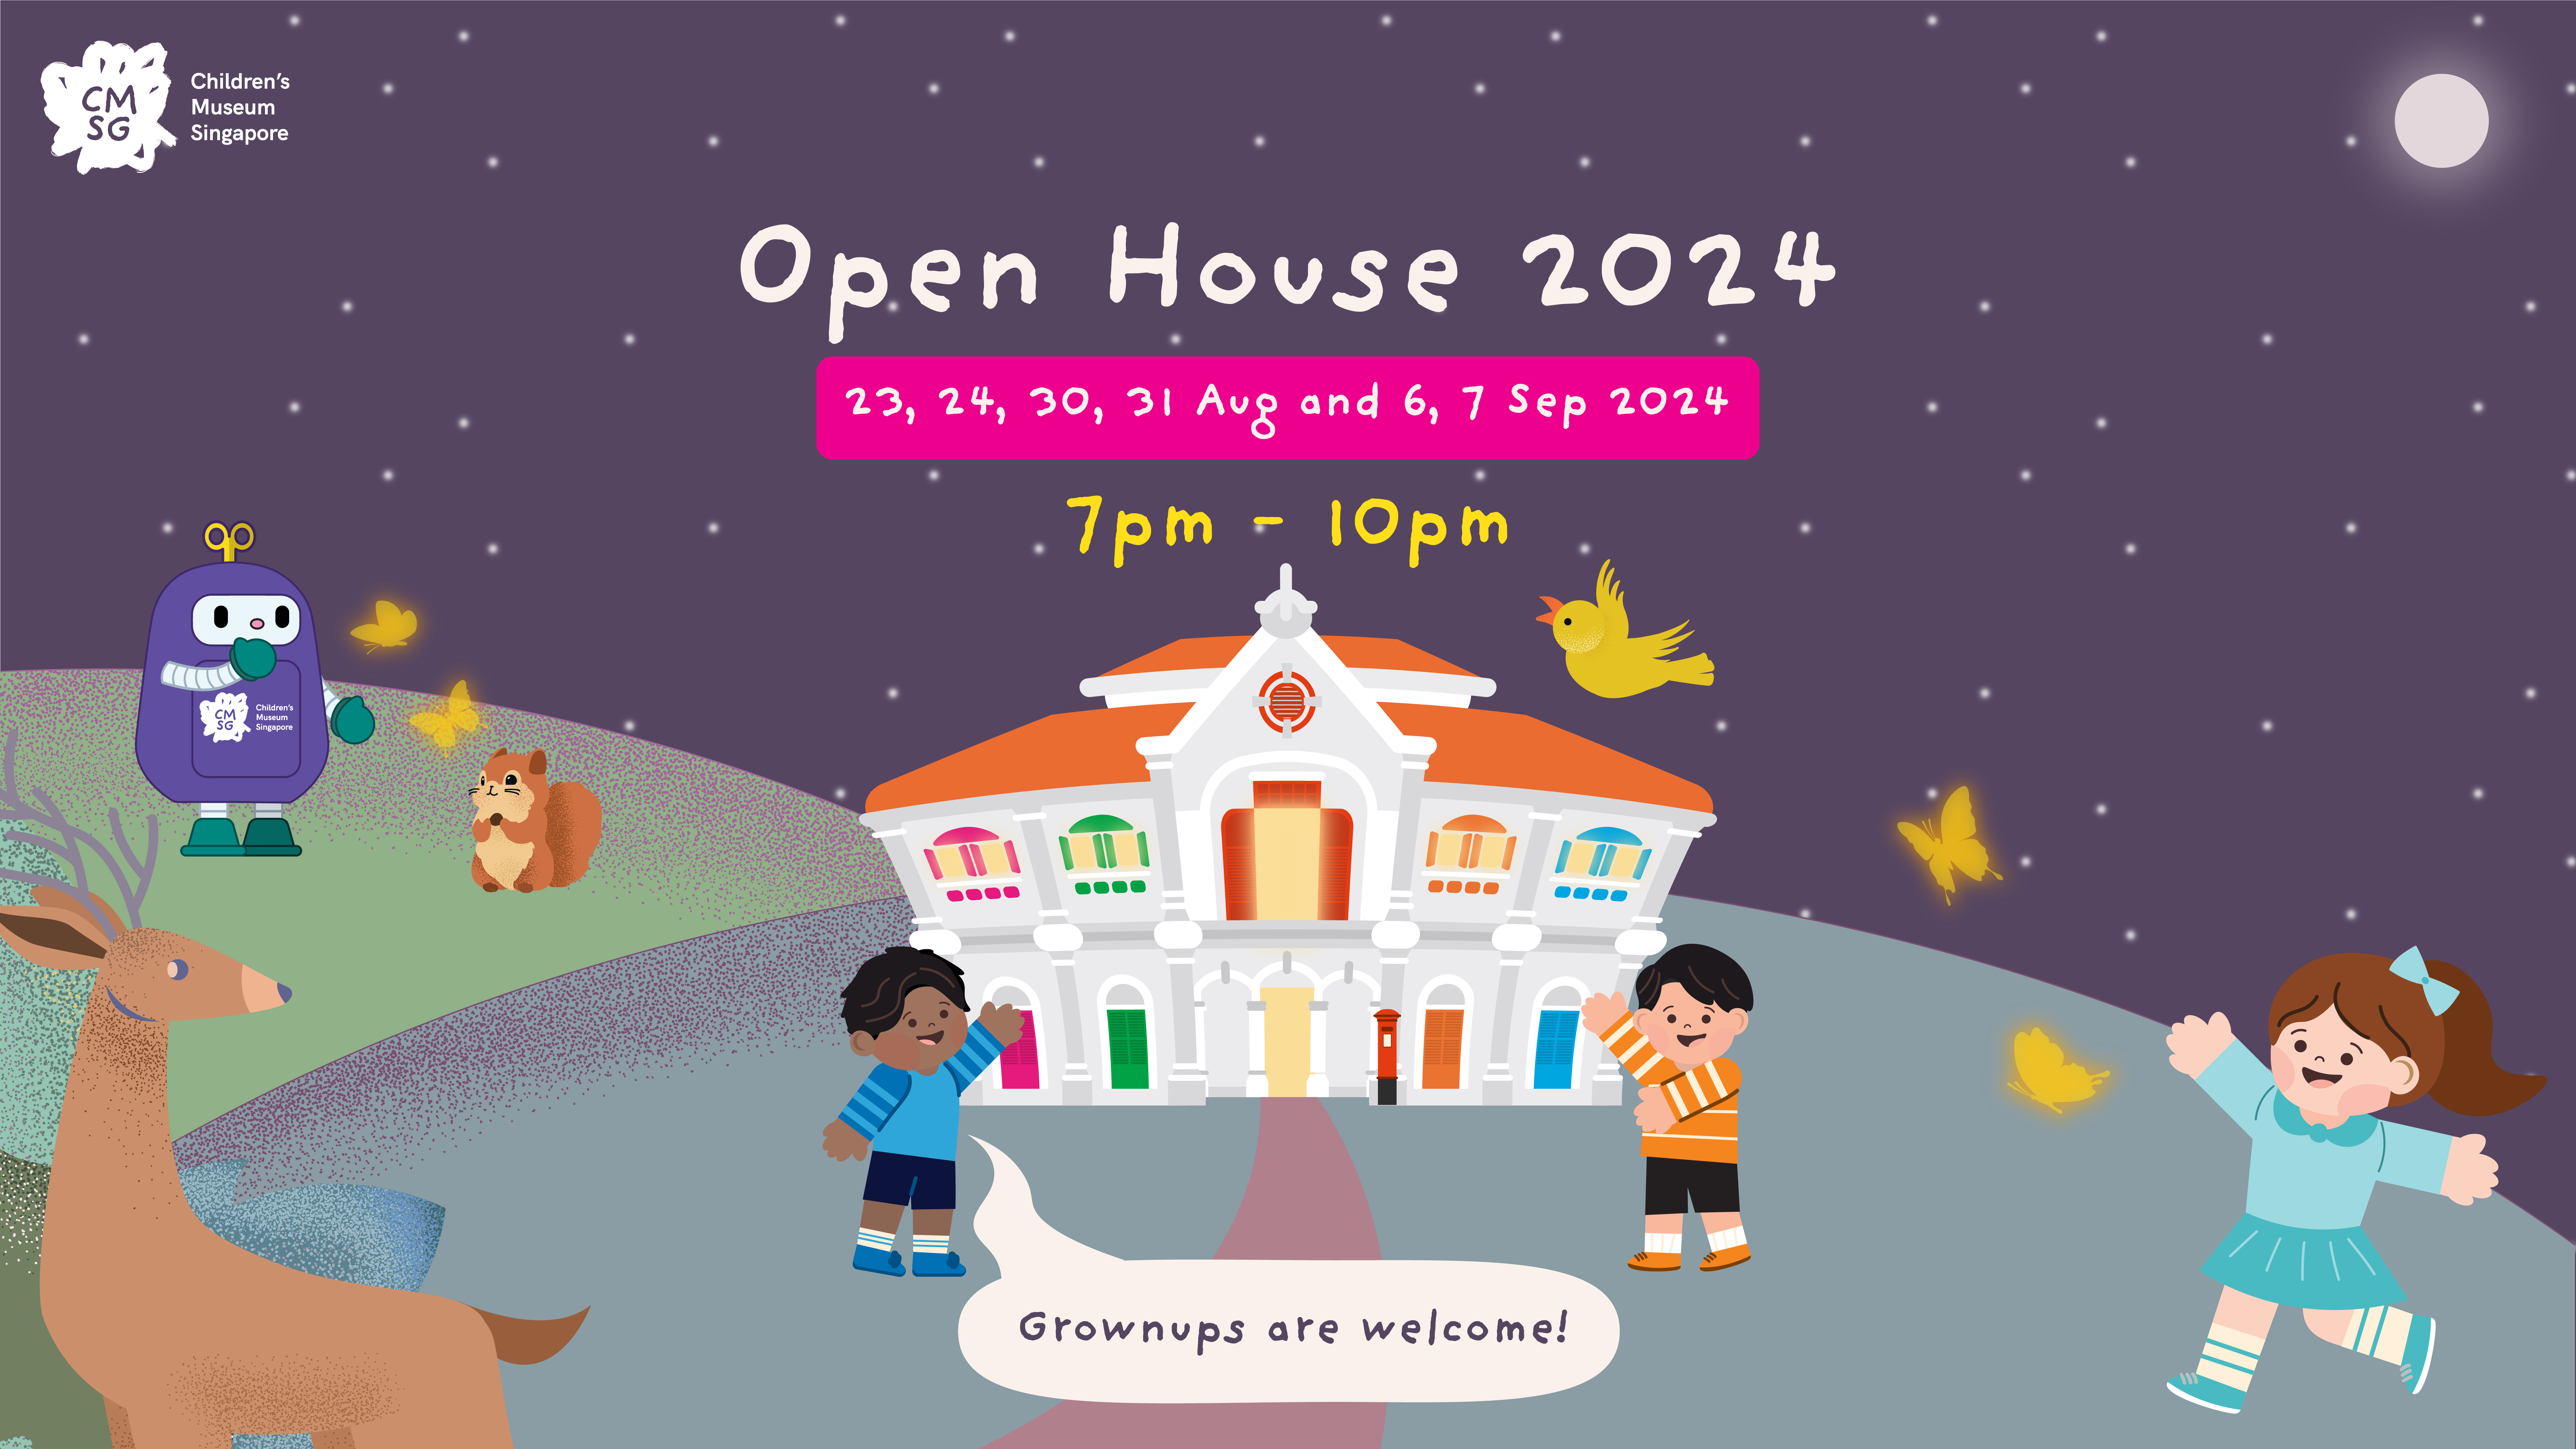 Open-House-at-Childrens-Museum-Singapore